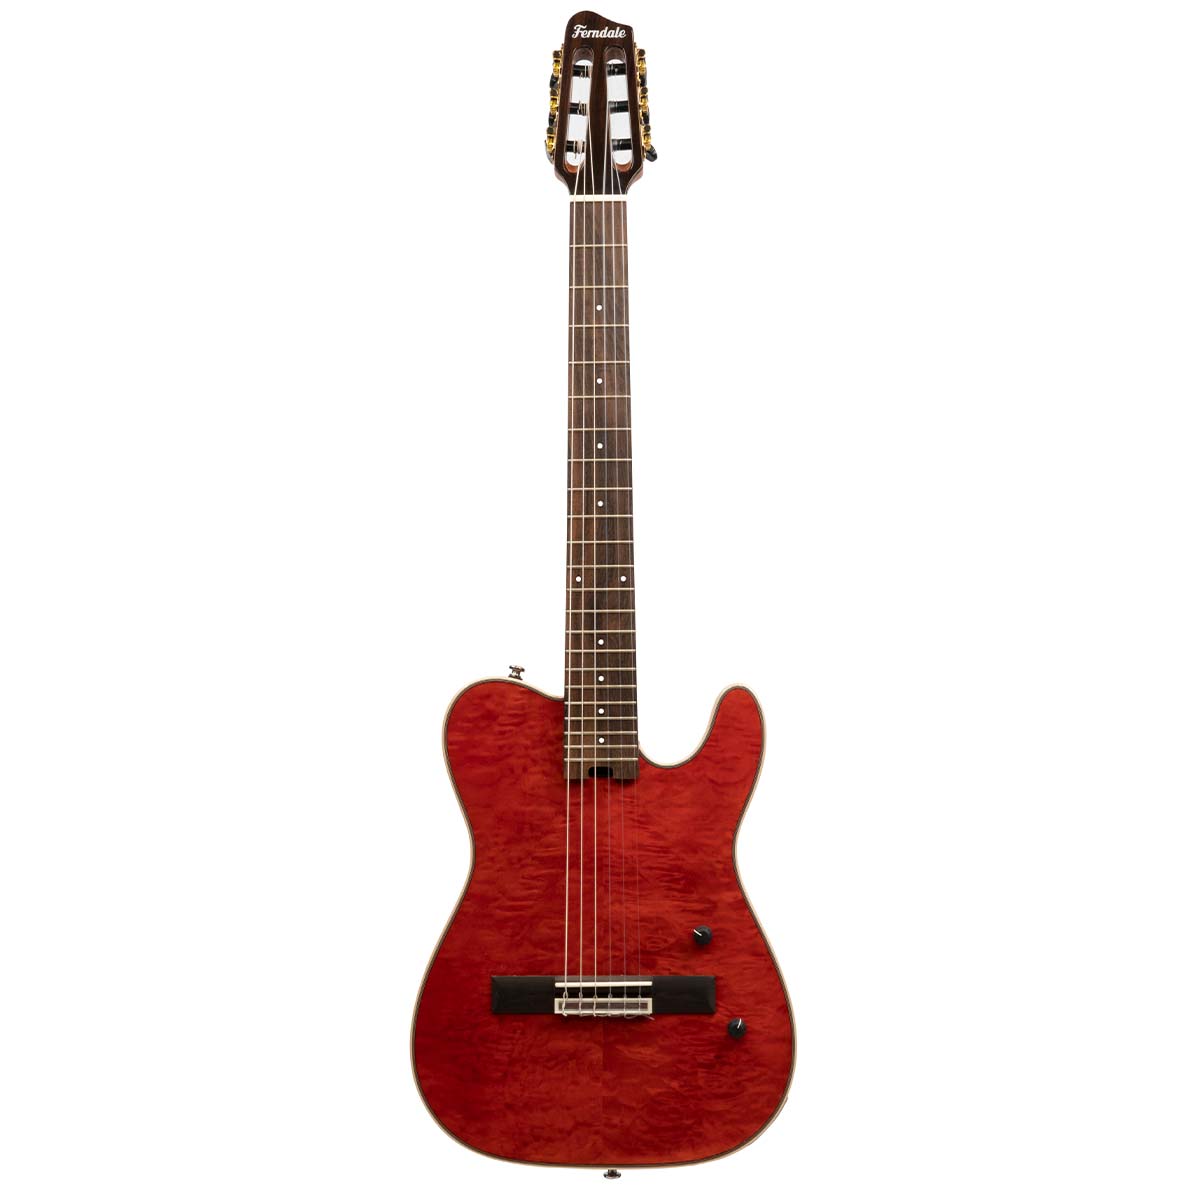 An image of Ferndale EC-2 Electro Classical Guitar Red Quilt | PMT Online